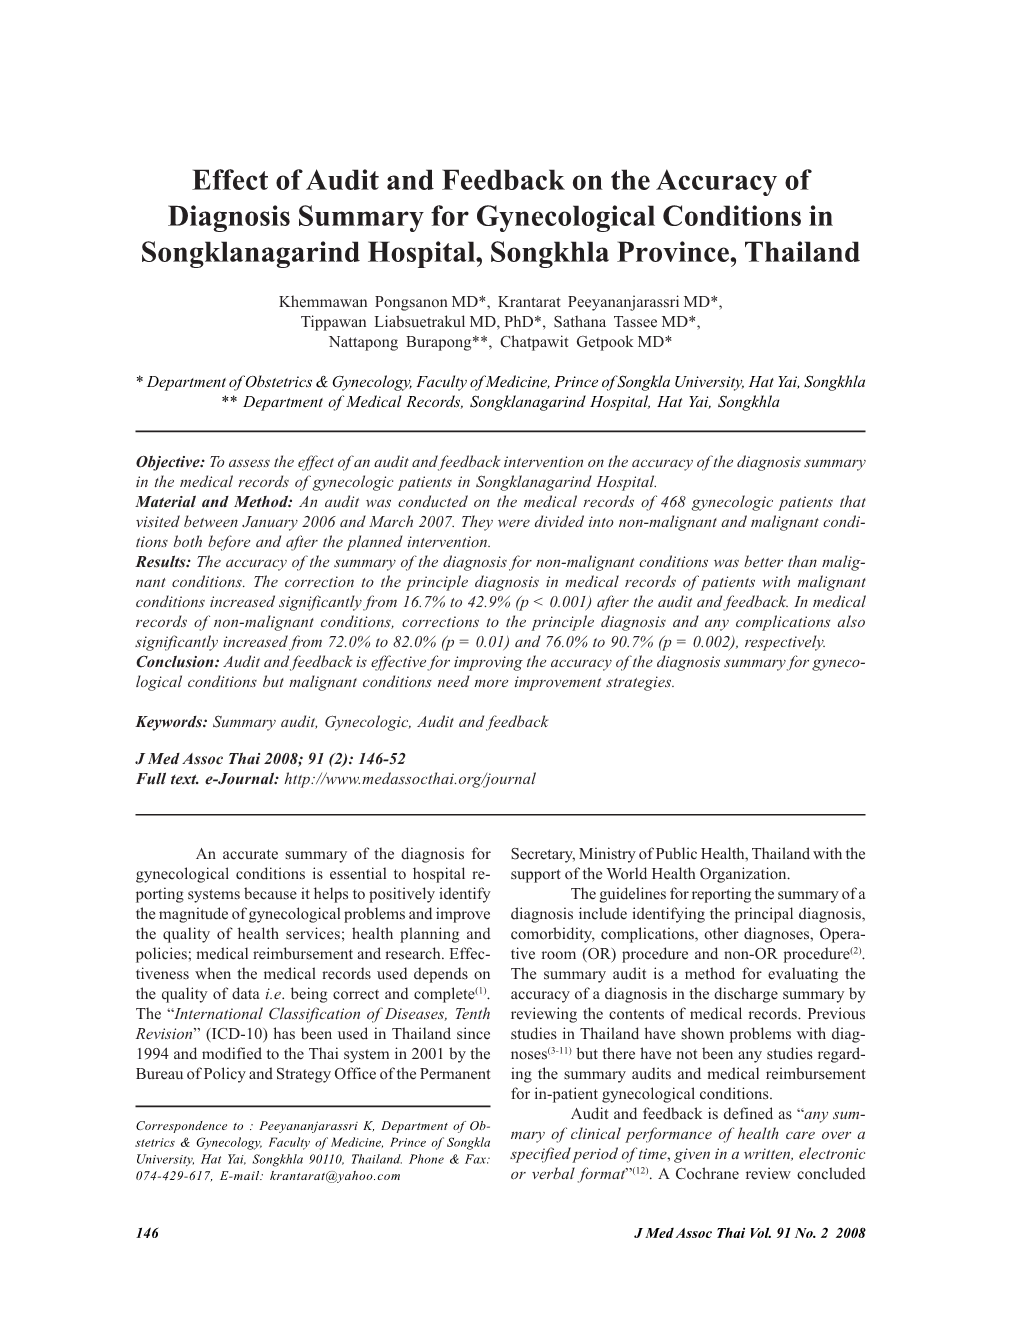 Effect of Audit and Feedback on the Accuracy of Diagnosis Summary for Gynecological Conditions in Songklanagarind Hospital, Songkhla Province, Thailand